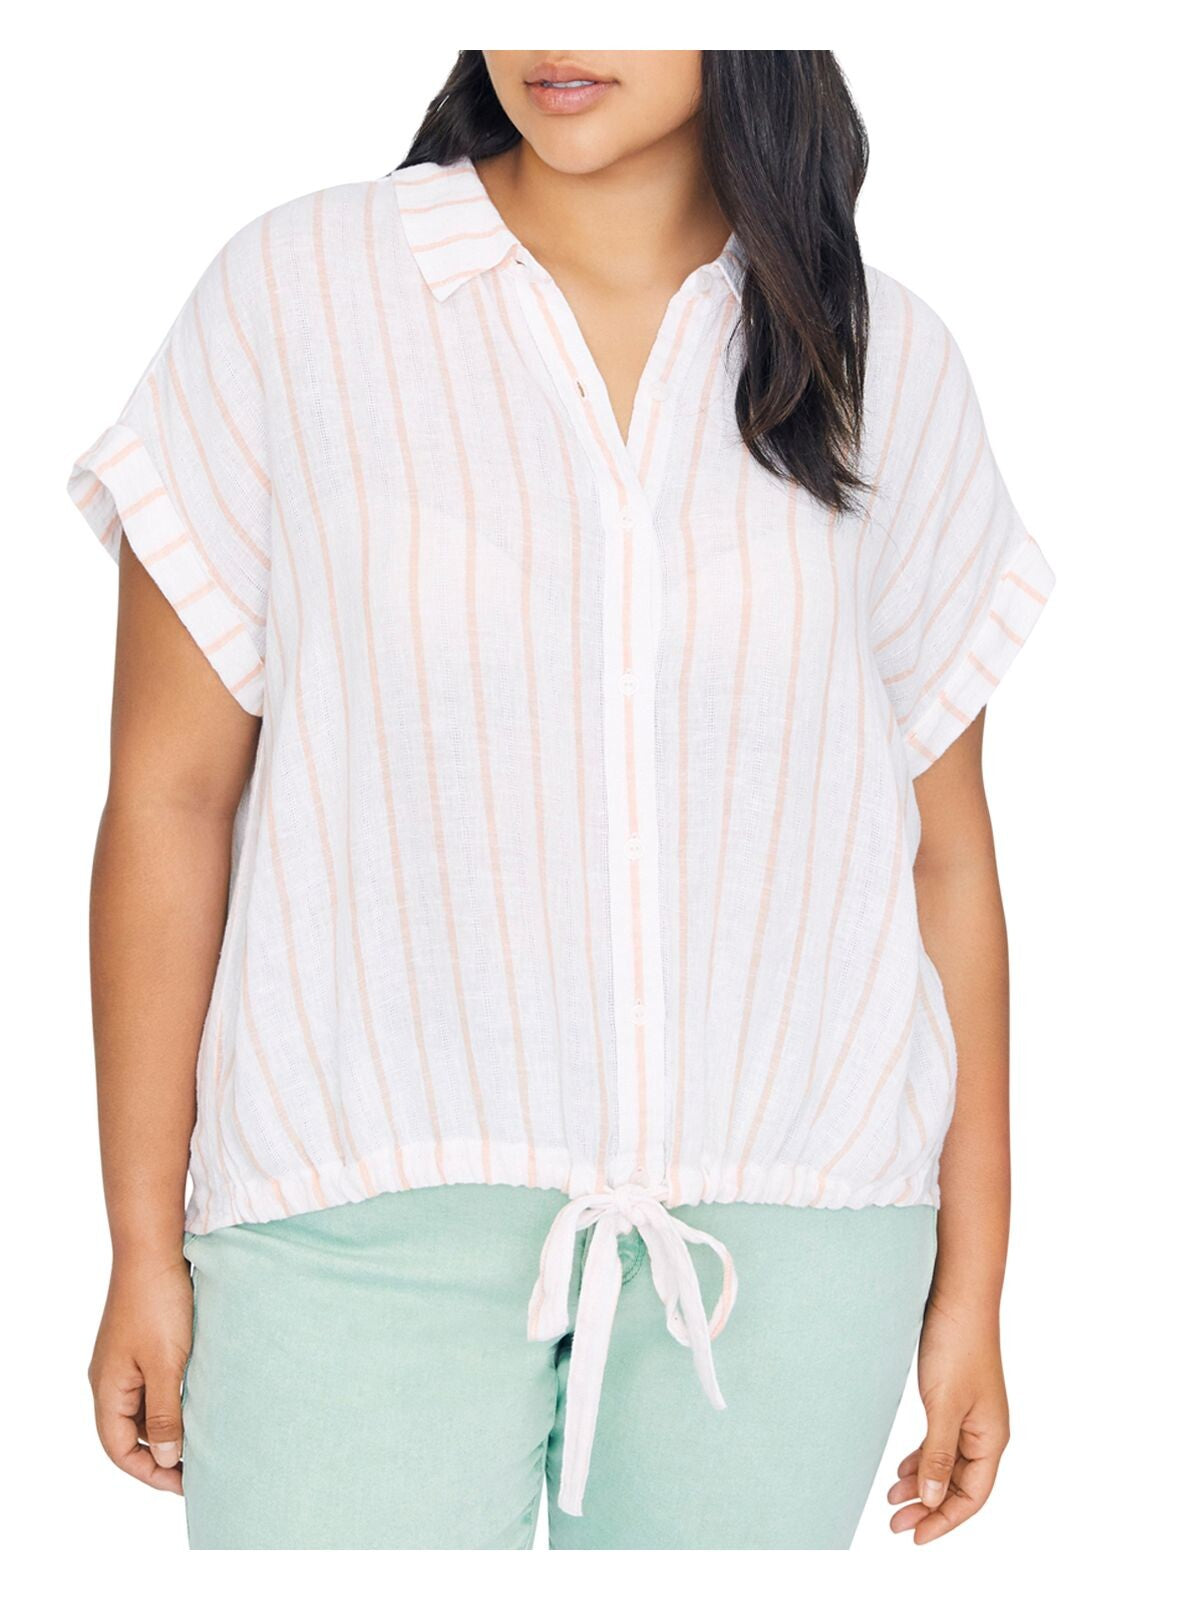 SANCTUARY Womens Short Sleeve Collared Button Up Top